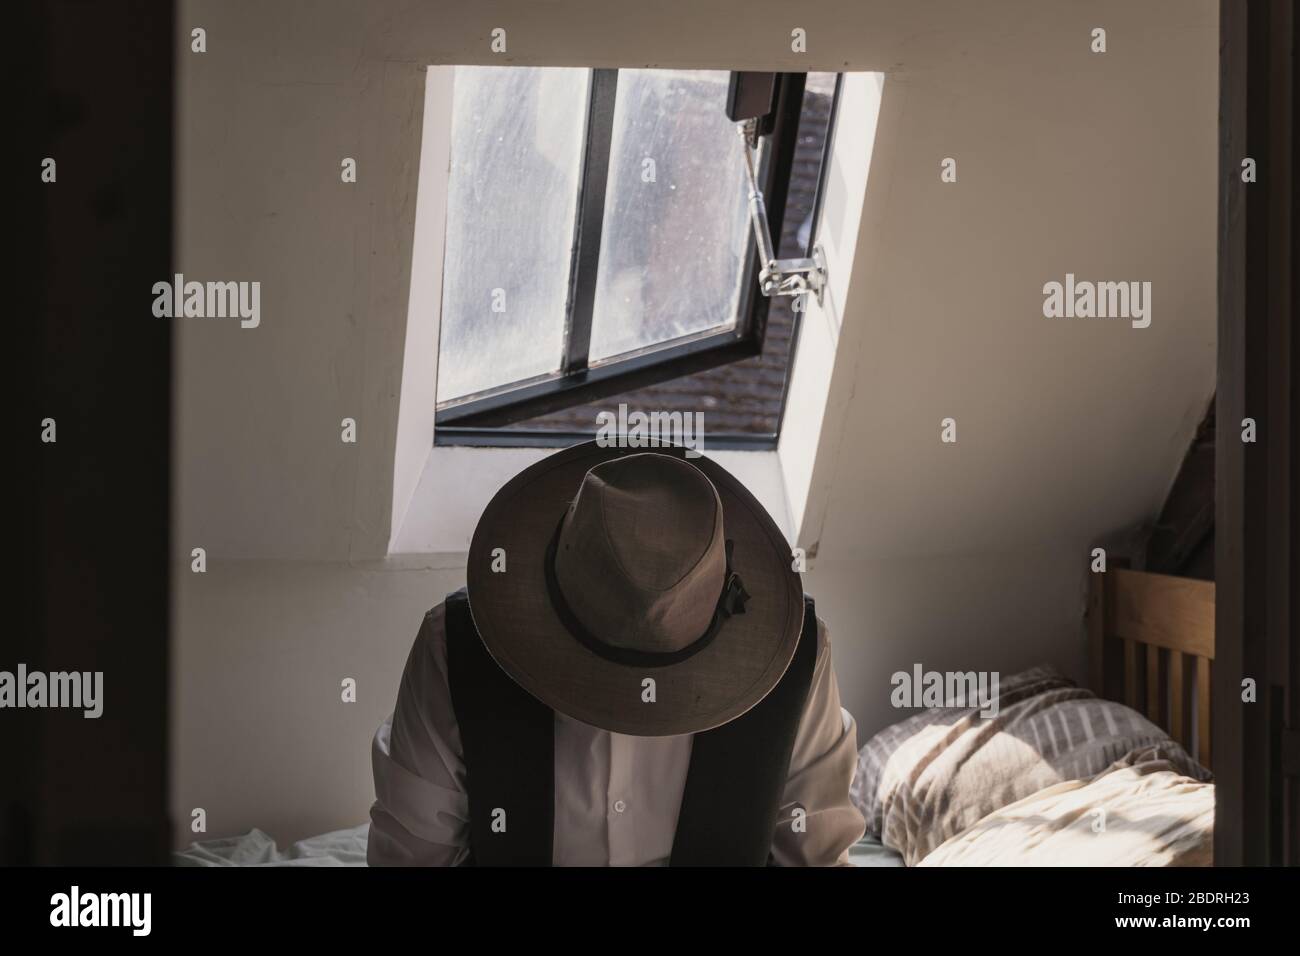 A man looking down wearing a fedora hat and waistcoat sitting on a bed with a window behind. With a desaturated, classic edit Stock Photo